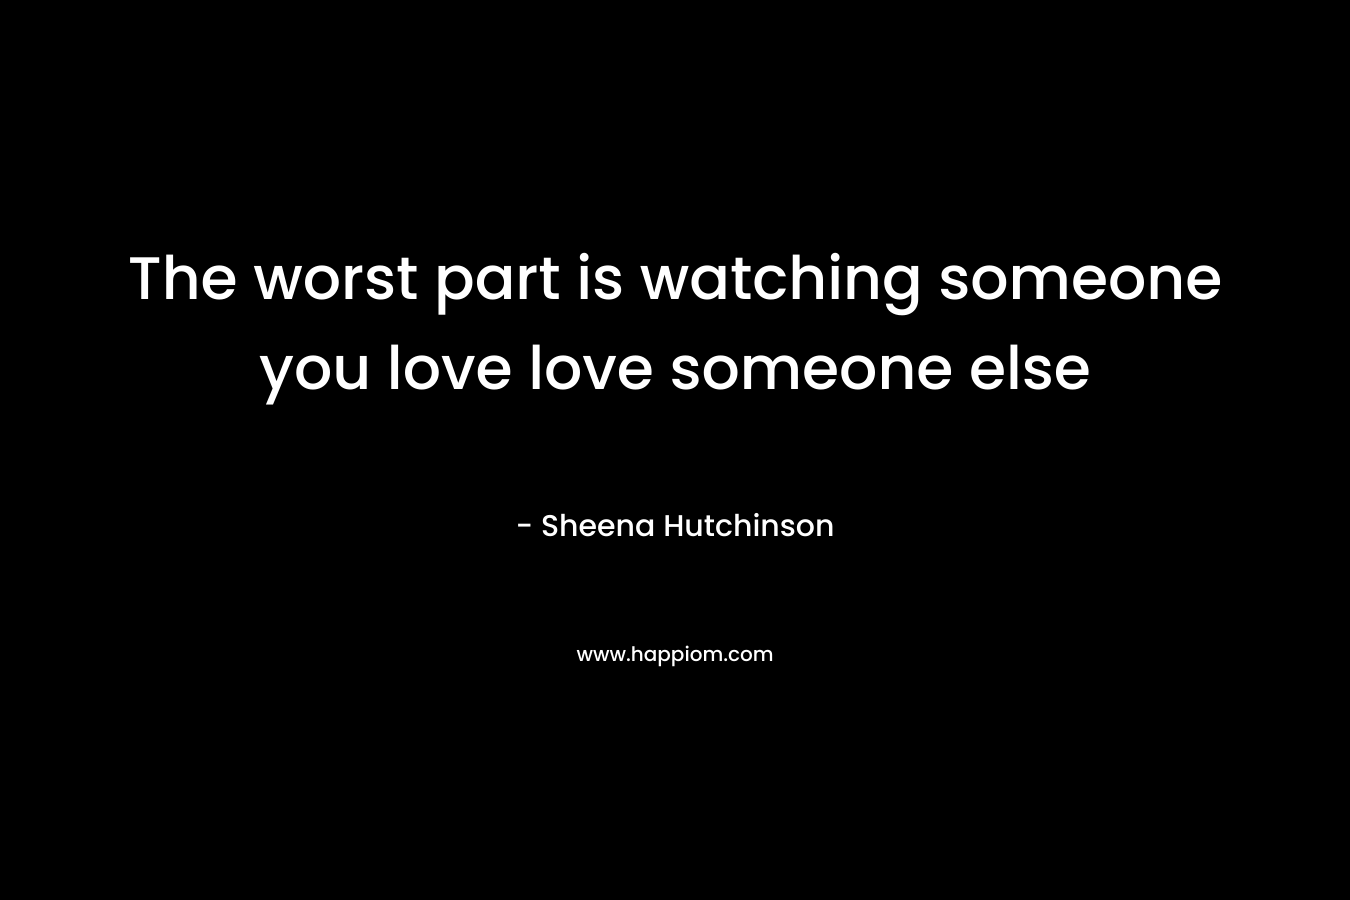 The worst part is watching someone you love love someone else – Sheena Hutchinson